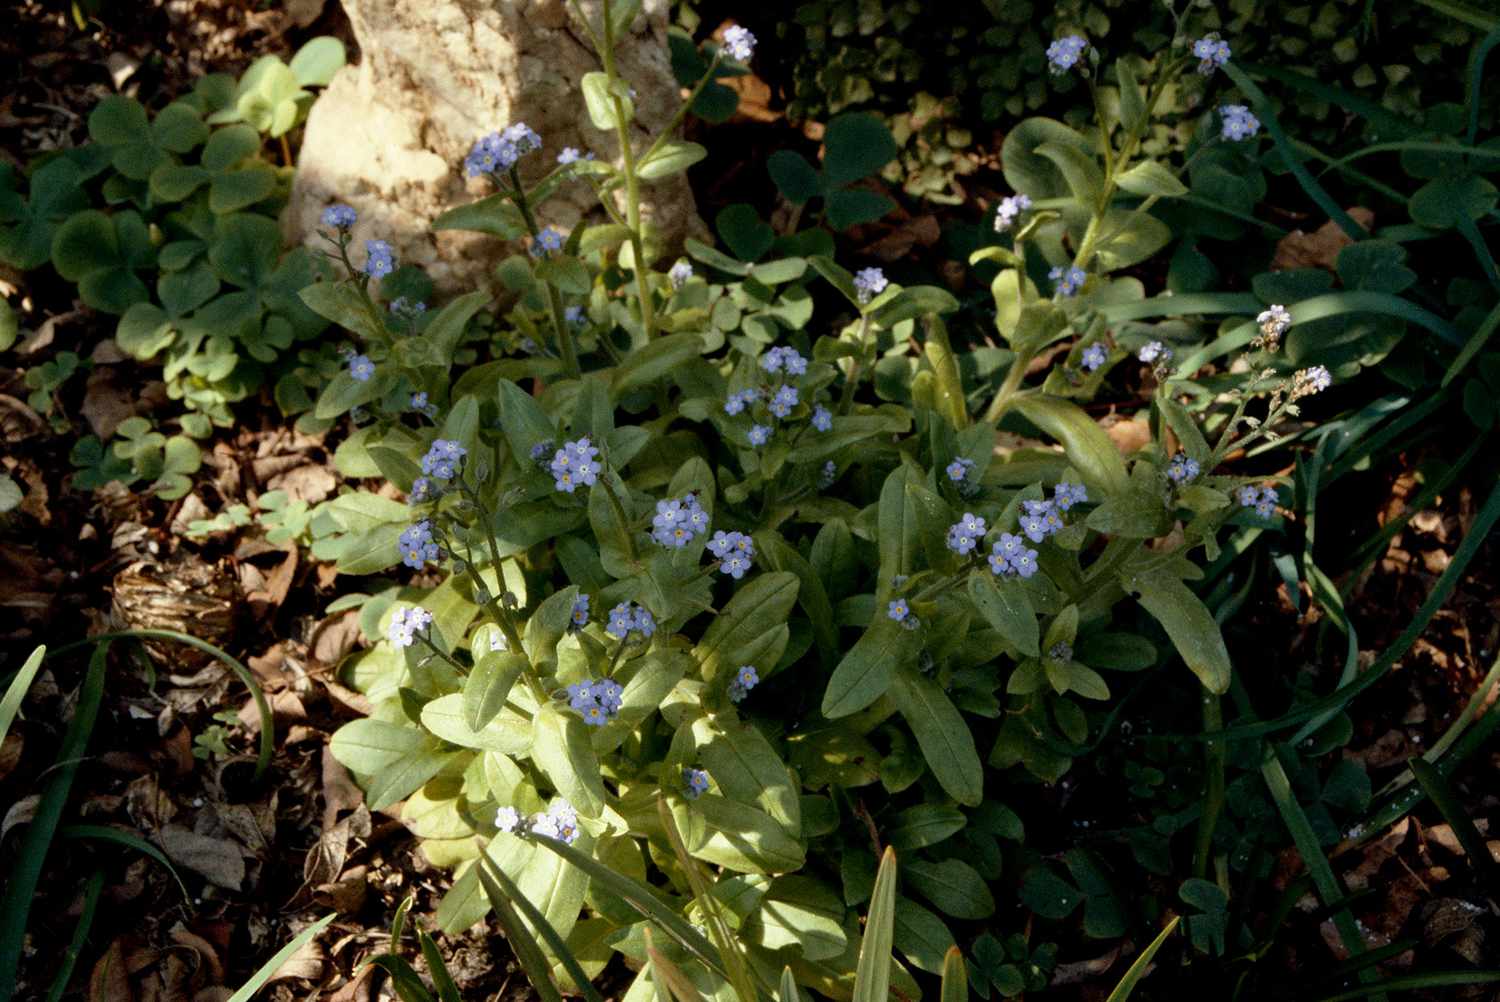 Woodland Forget-Me-Not